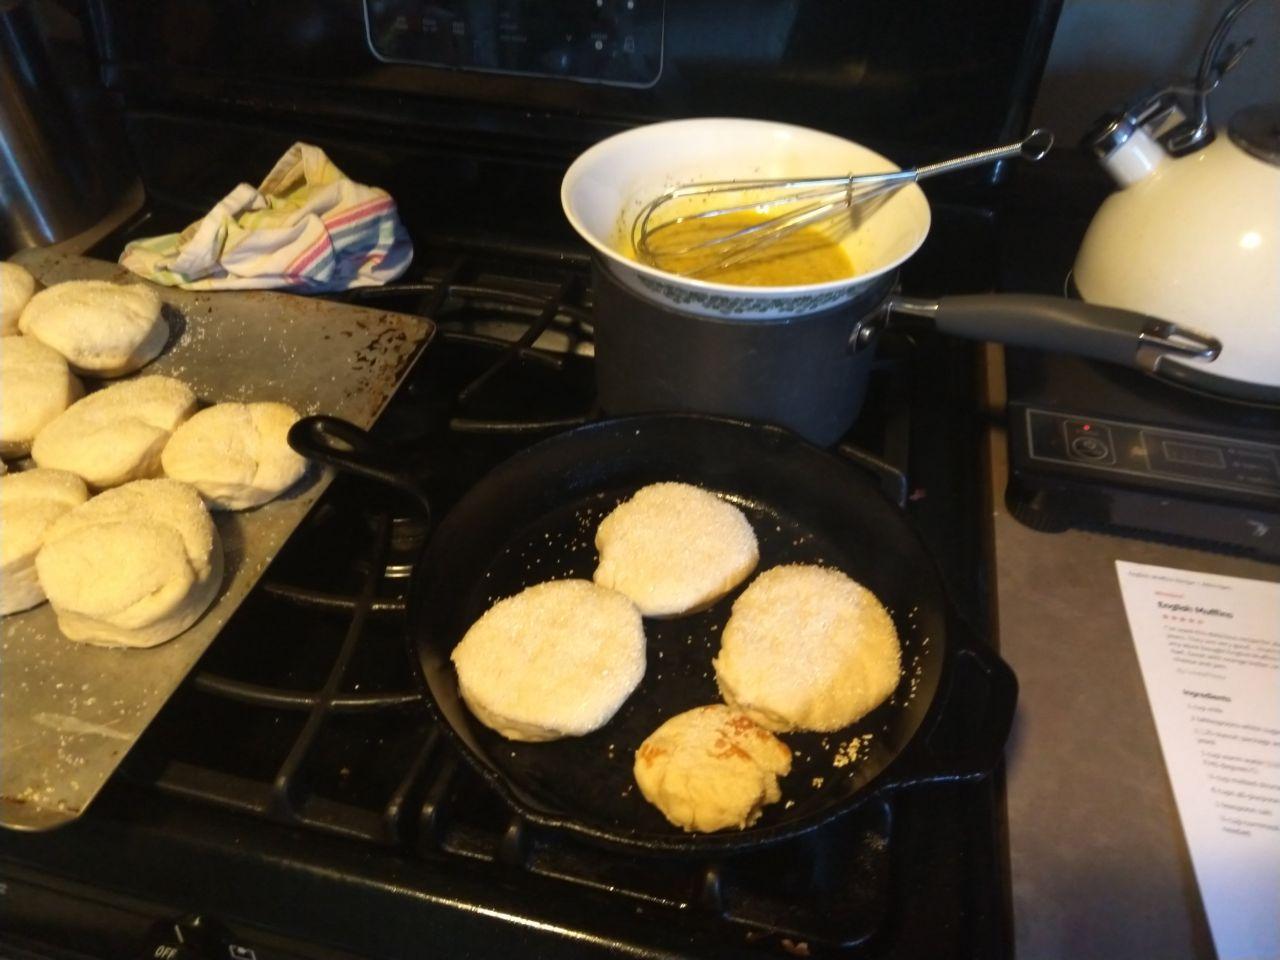 English muffins cooking in a cast iron skillet.